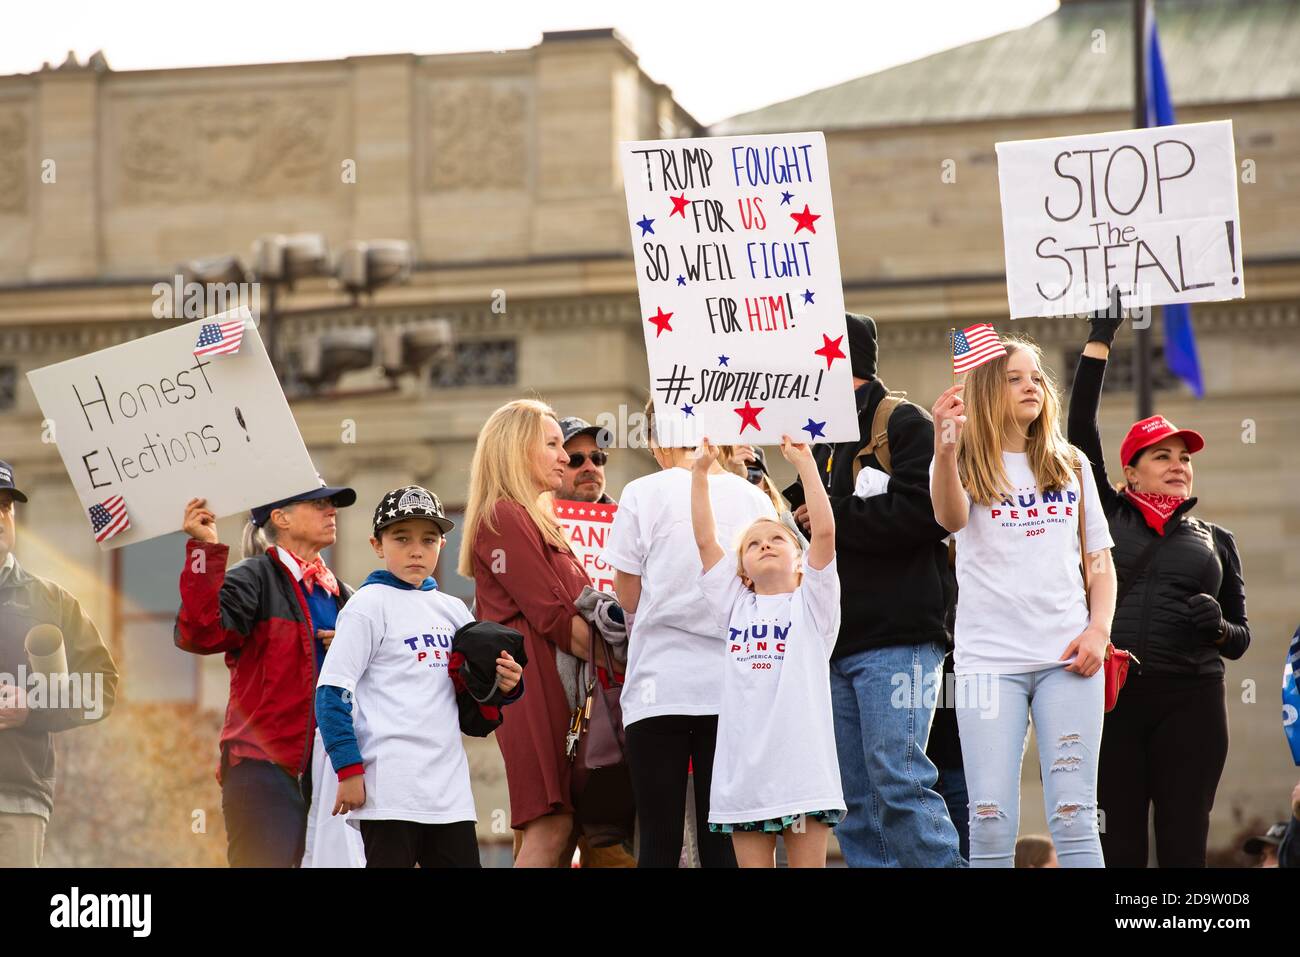 Helena, Montana / Nov 7, 2020: Protesters at 'Stop the Steal' rally holding signs for honest election and in support of Donald Trump, little girl hold Stock Photo